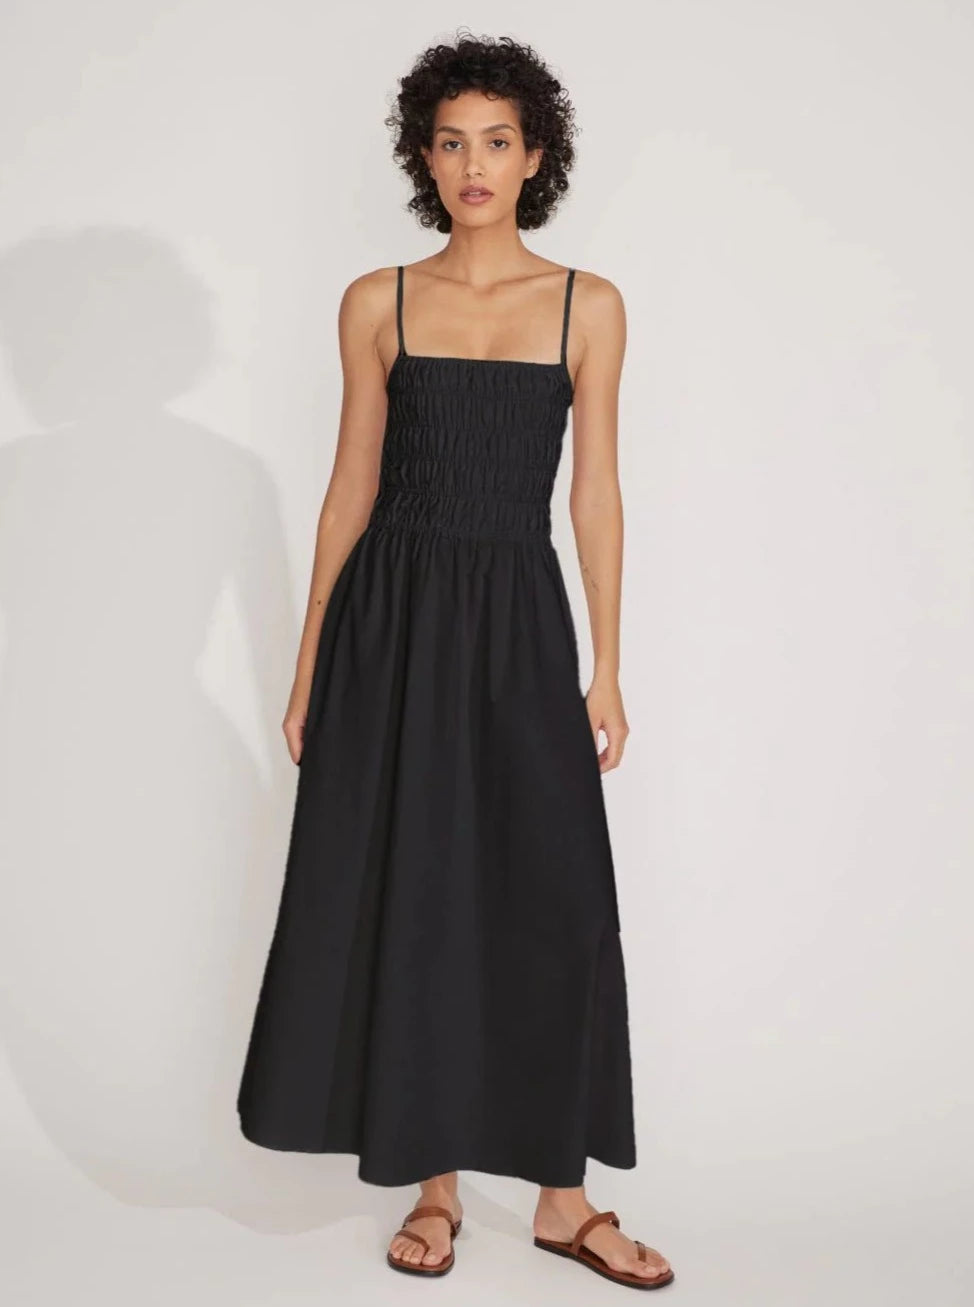 Dresses featured at Beau & Ro – Page 5